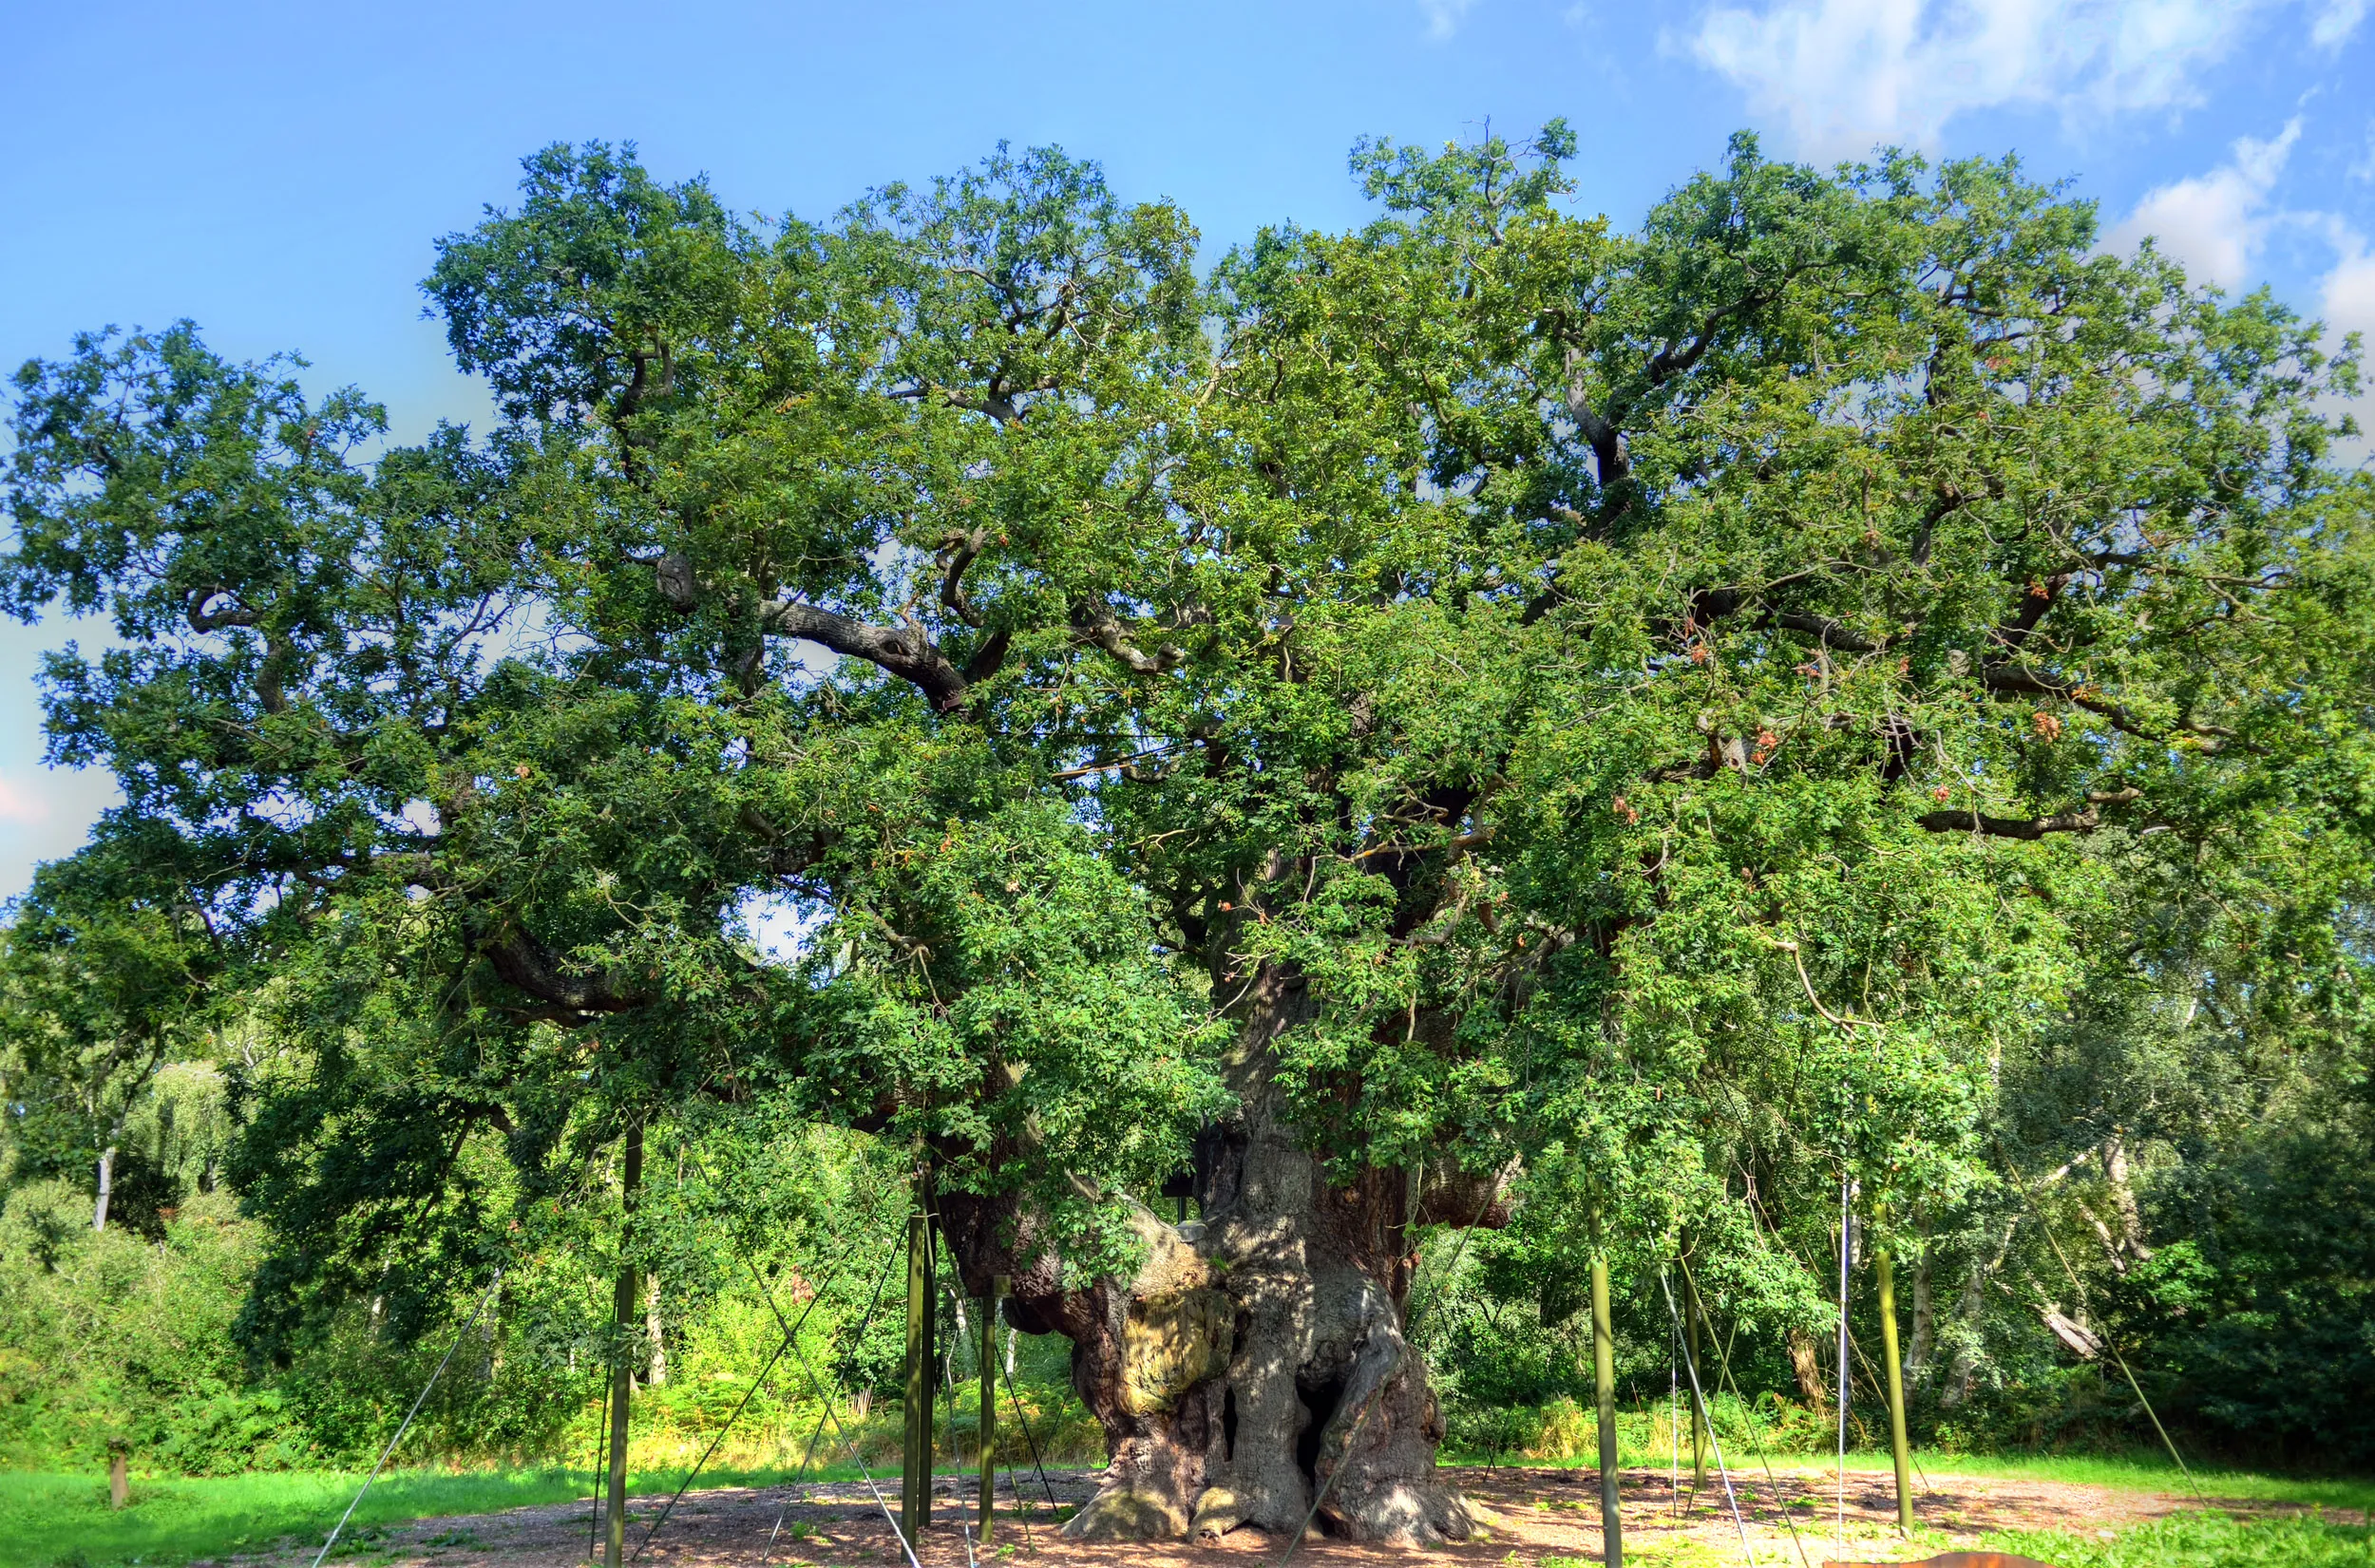 The view of the Major Oak tree at Sherwood Forest.